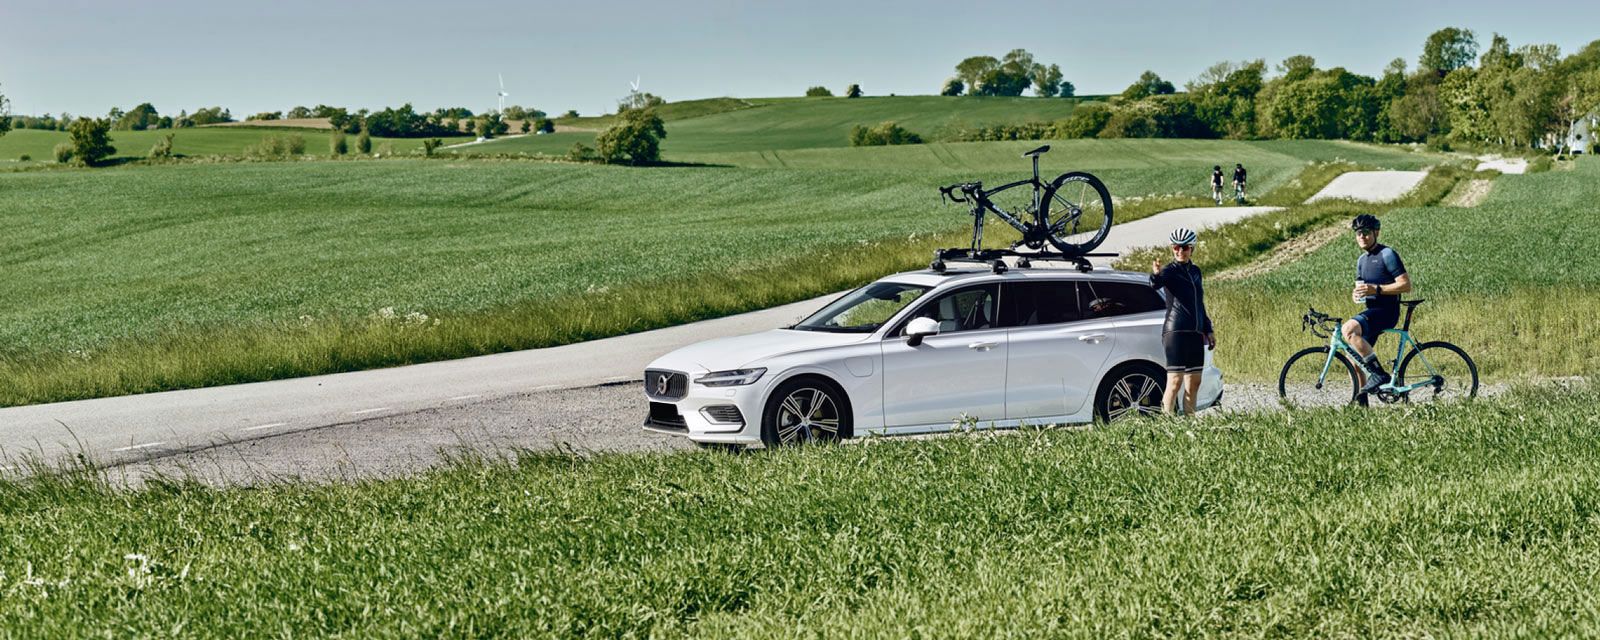 Two cyclists in a field prepare for a bike trip with their bikes loaded on a Thule roof bike rack.